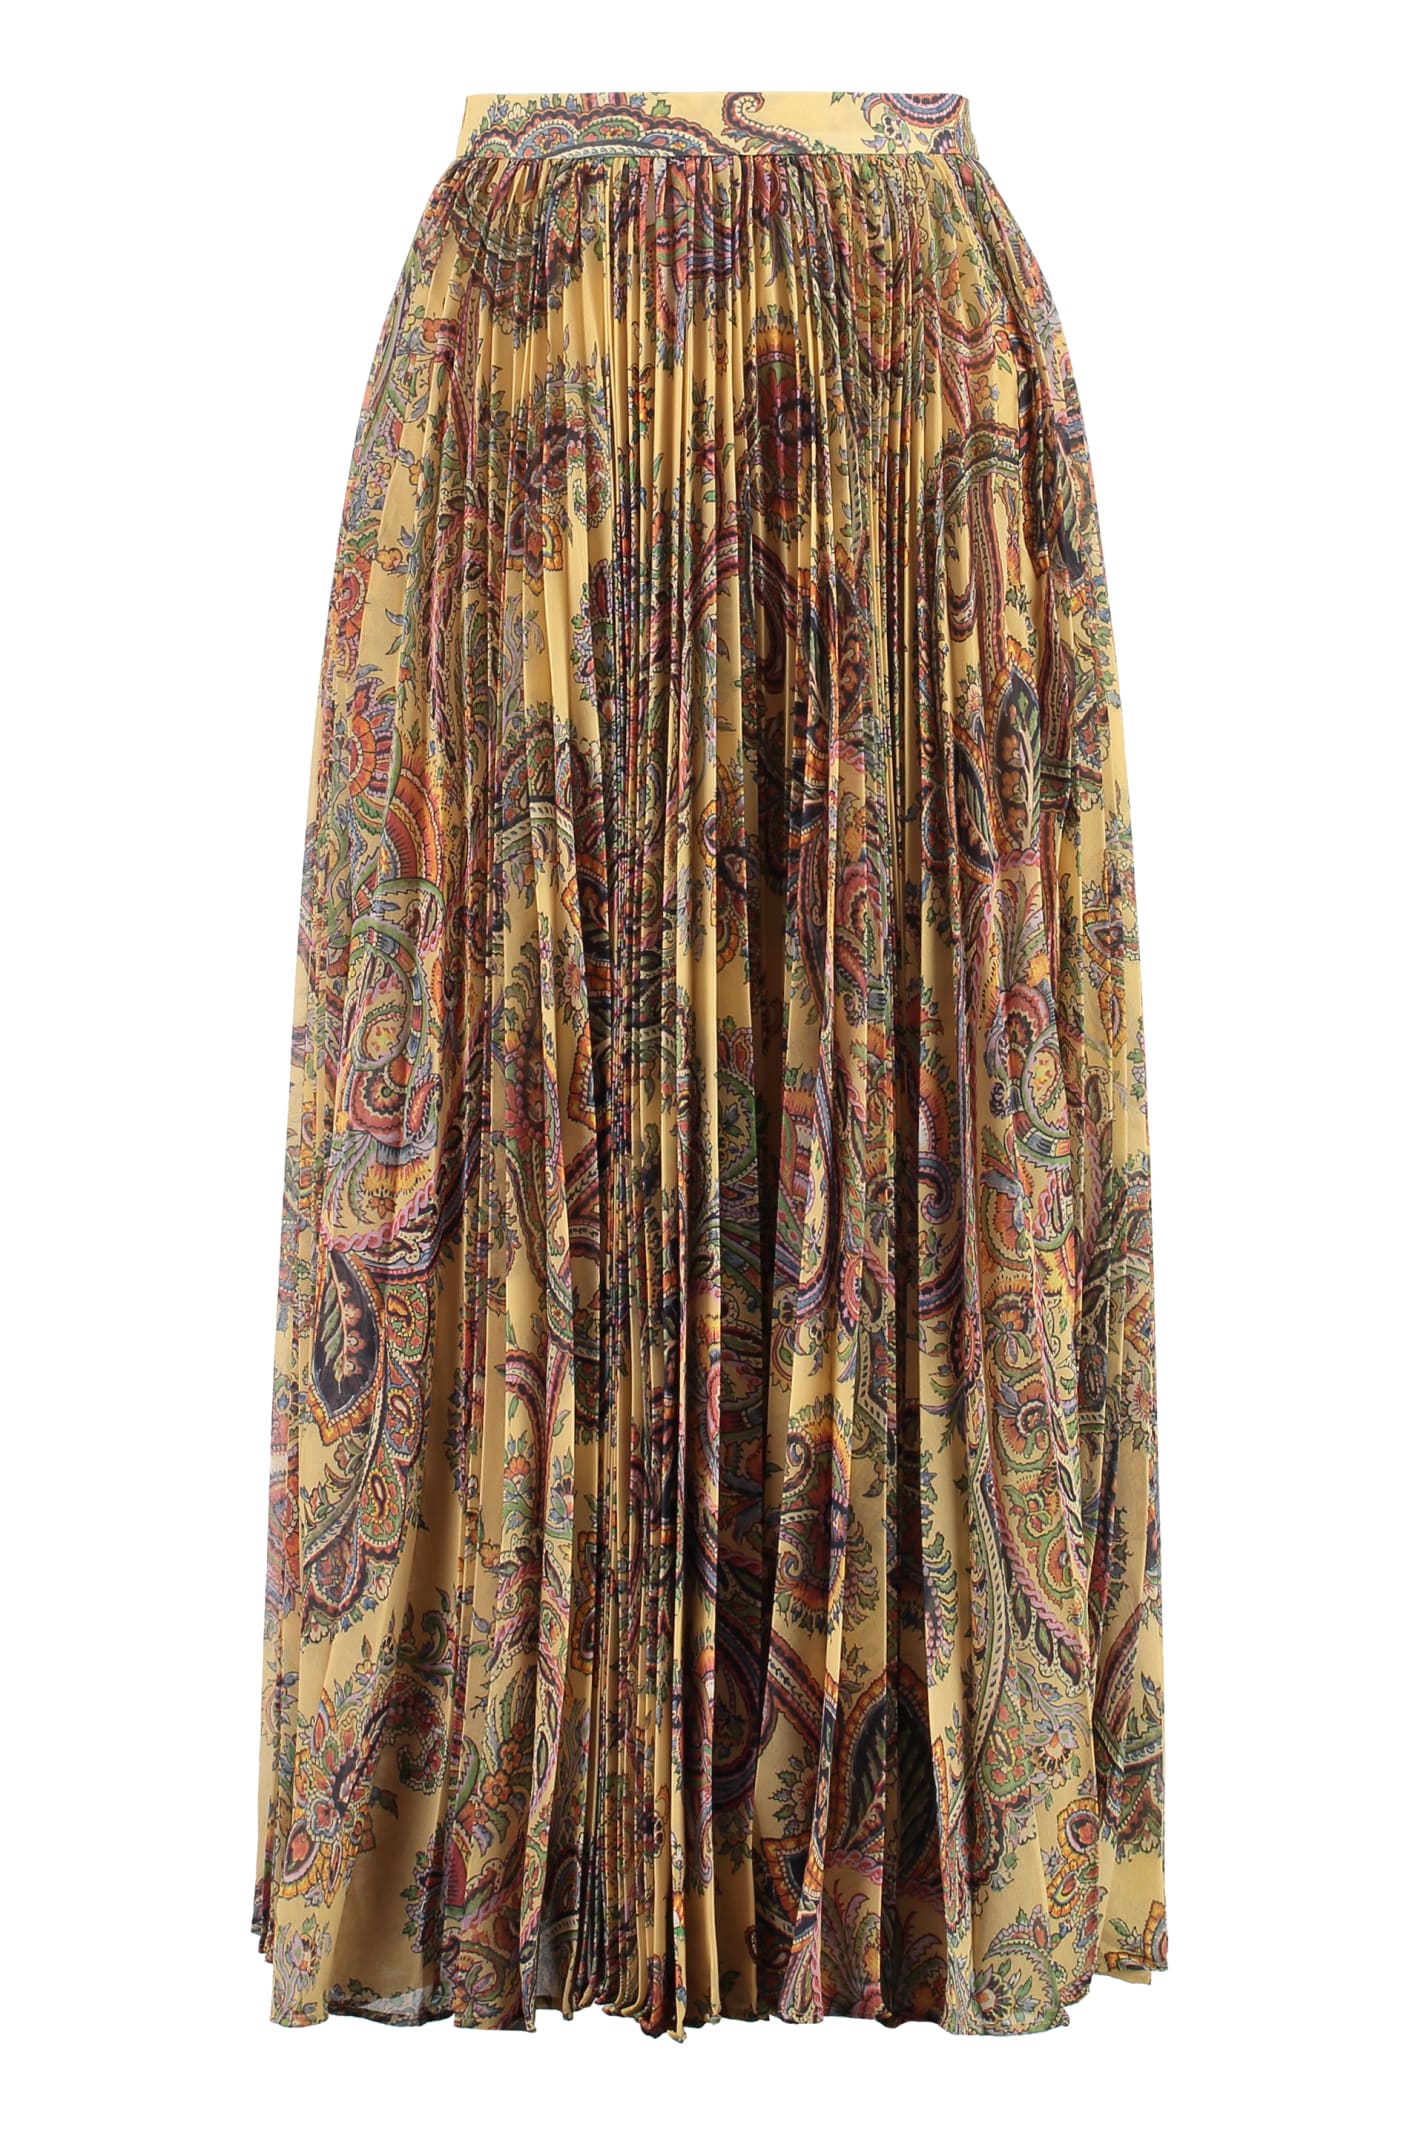 Shop Etro Printed Pleated Skirt